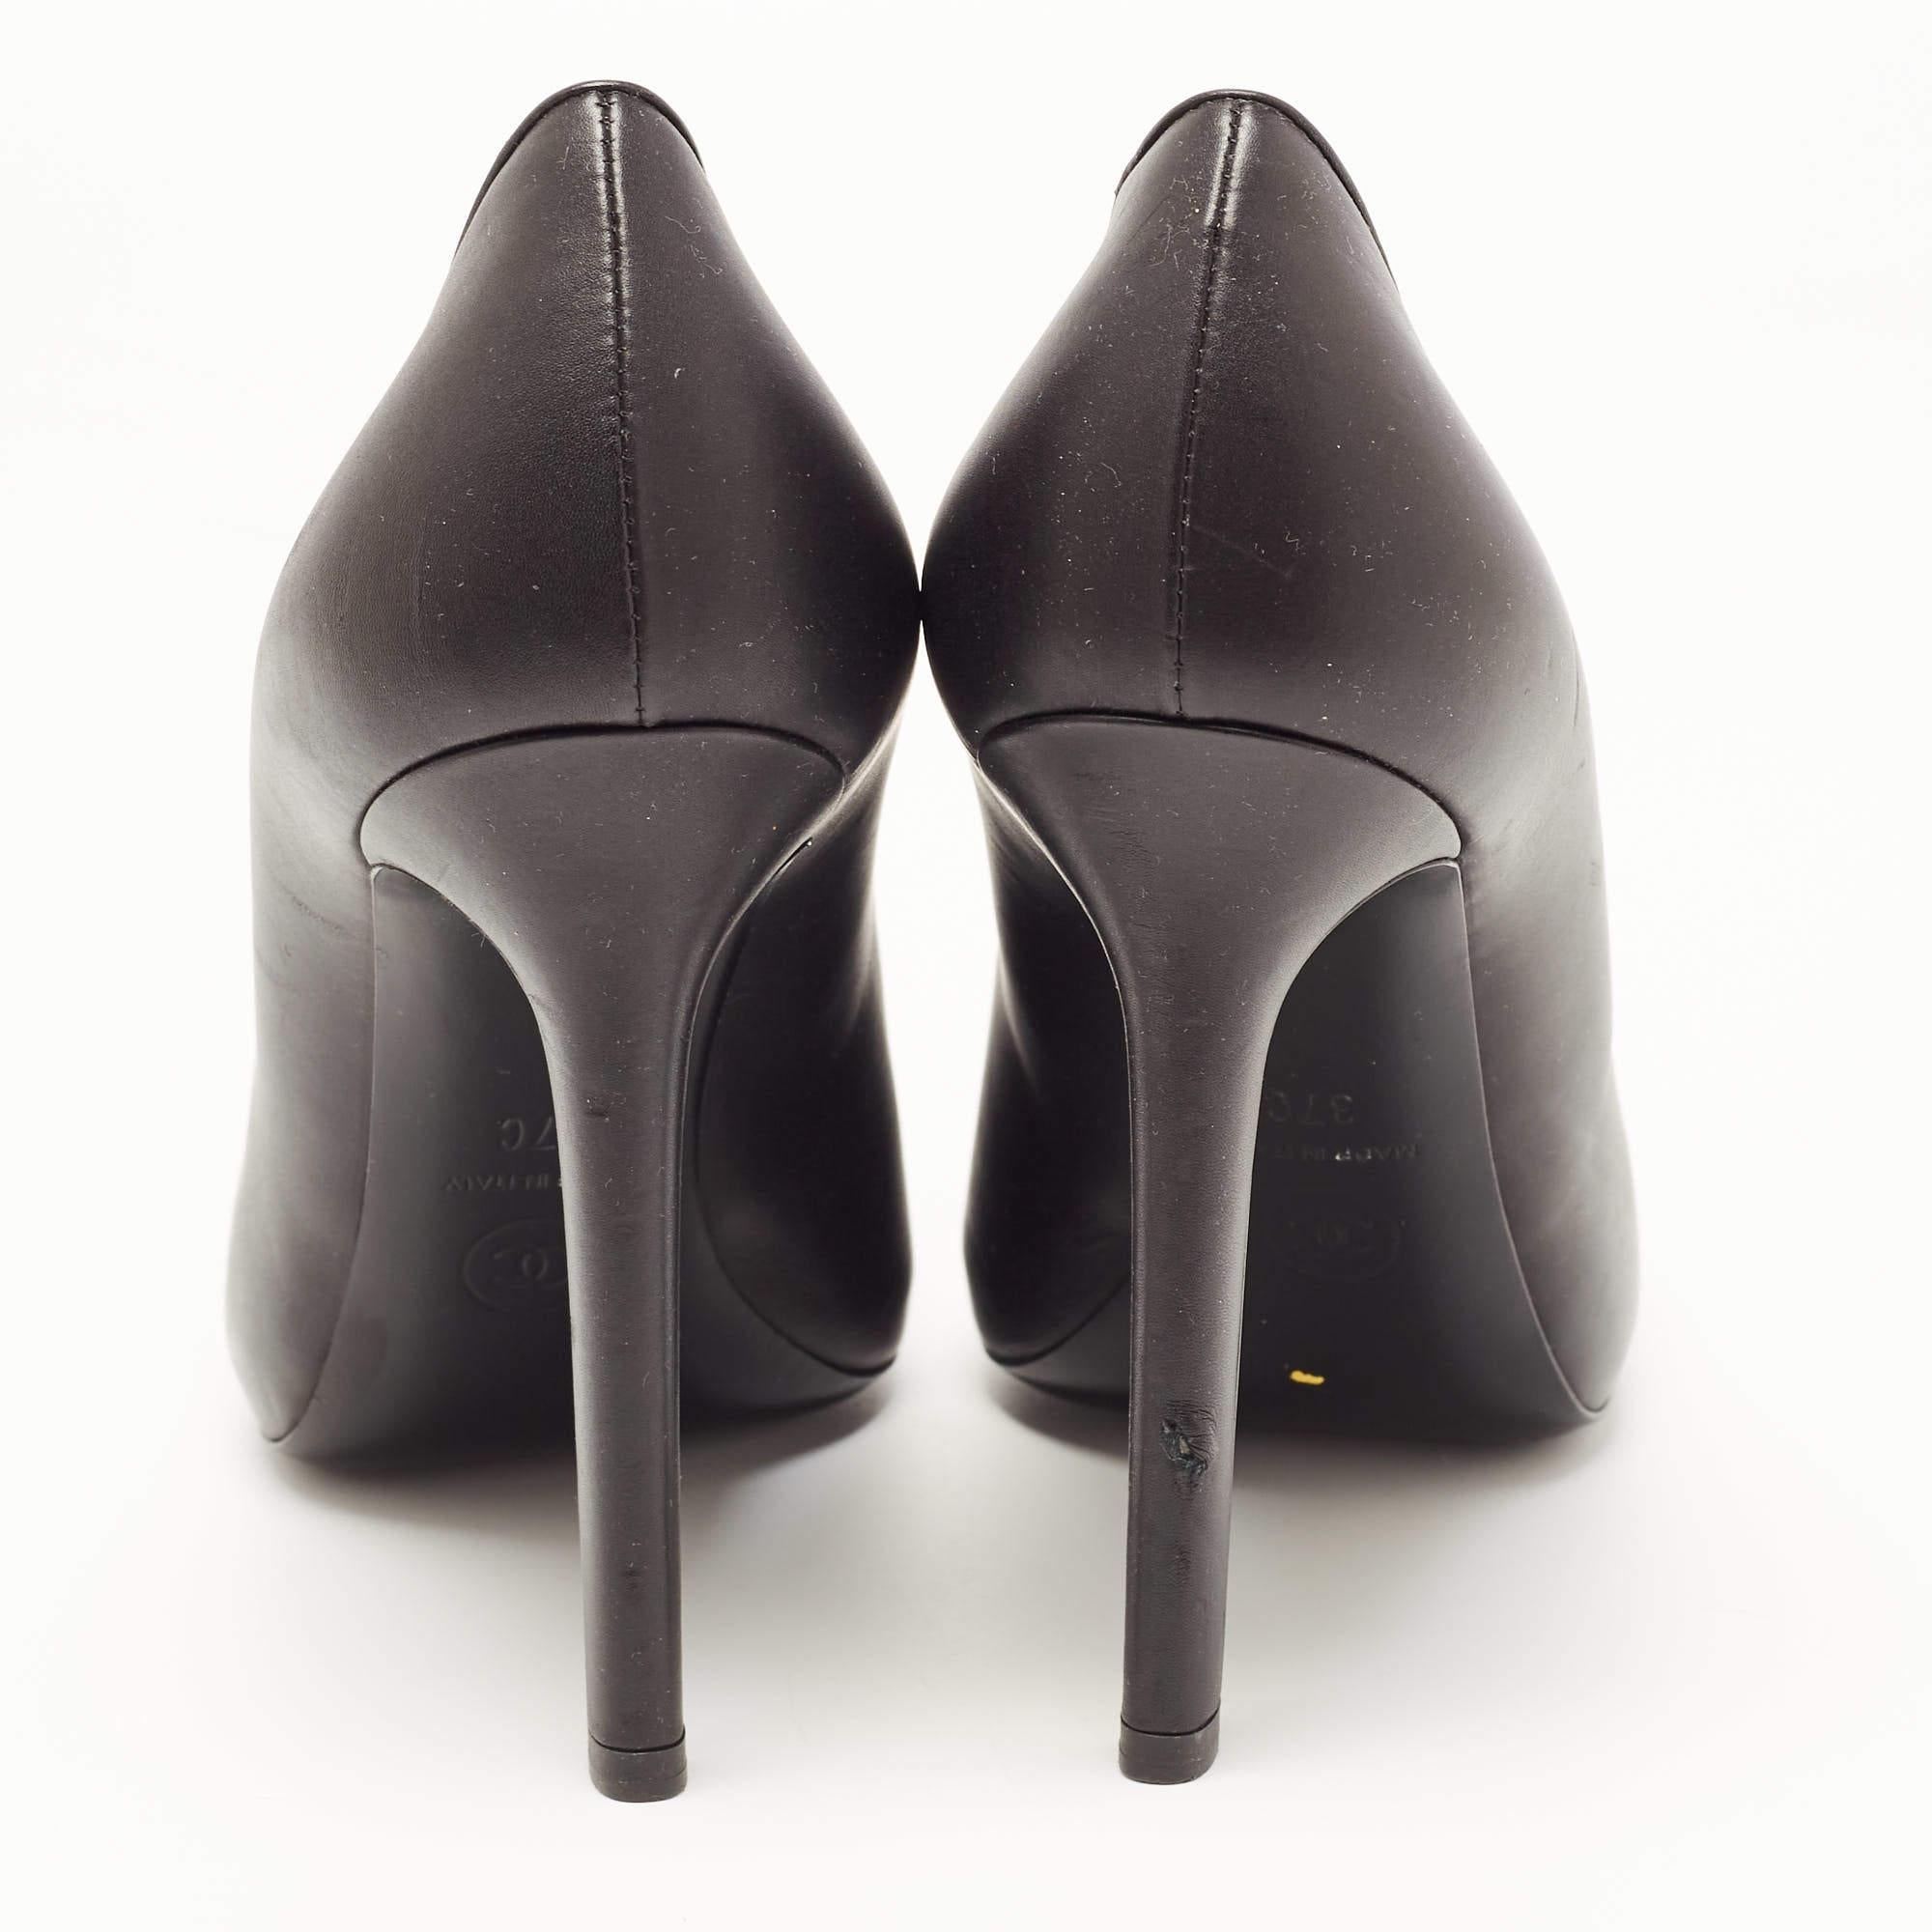 Exhibit an elegant style with this pair of pumps. These Chanel black shoes for women are crafted from quality materials. They are set on durable soles and sleek heels.

